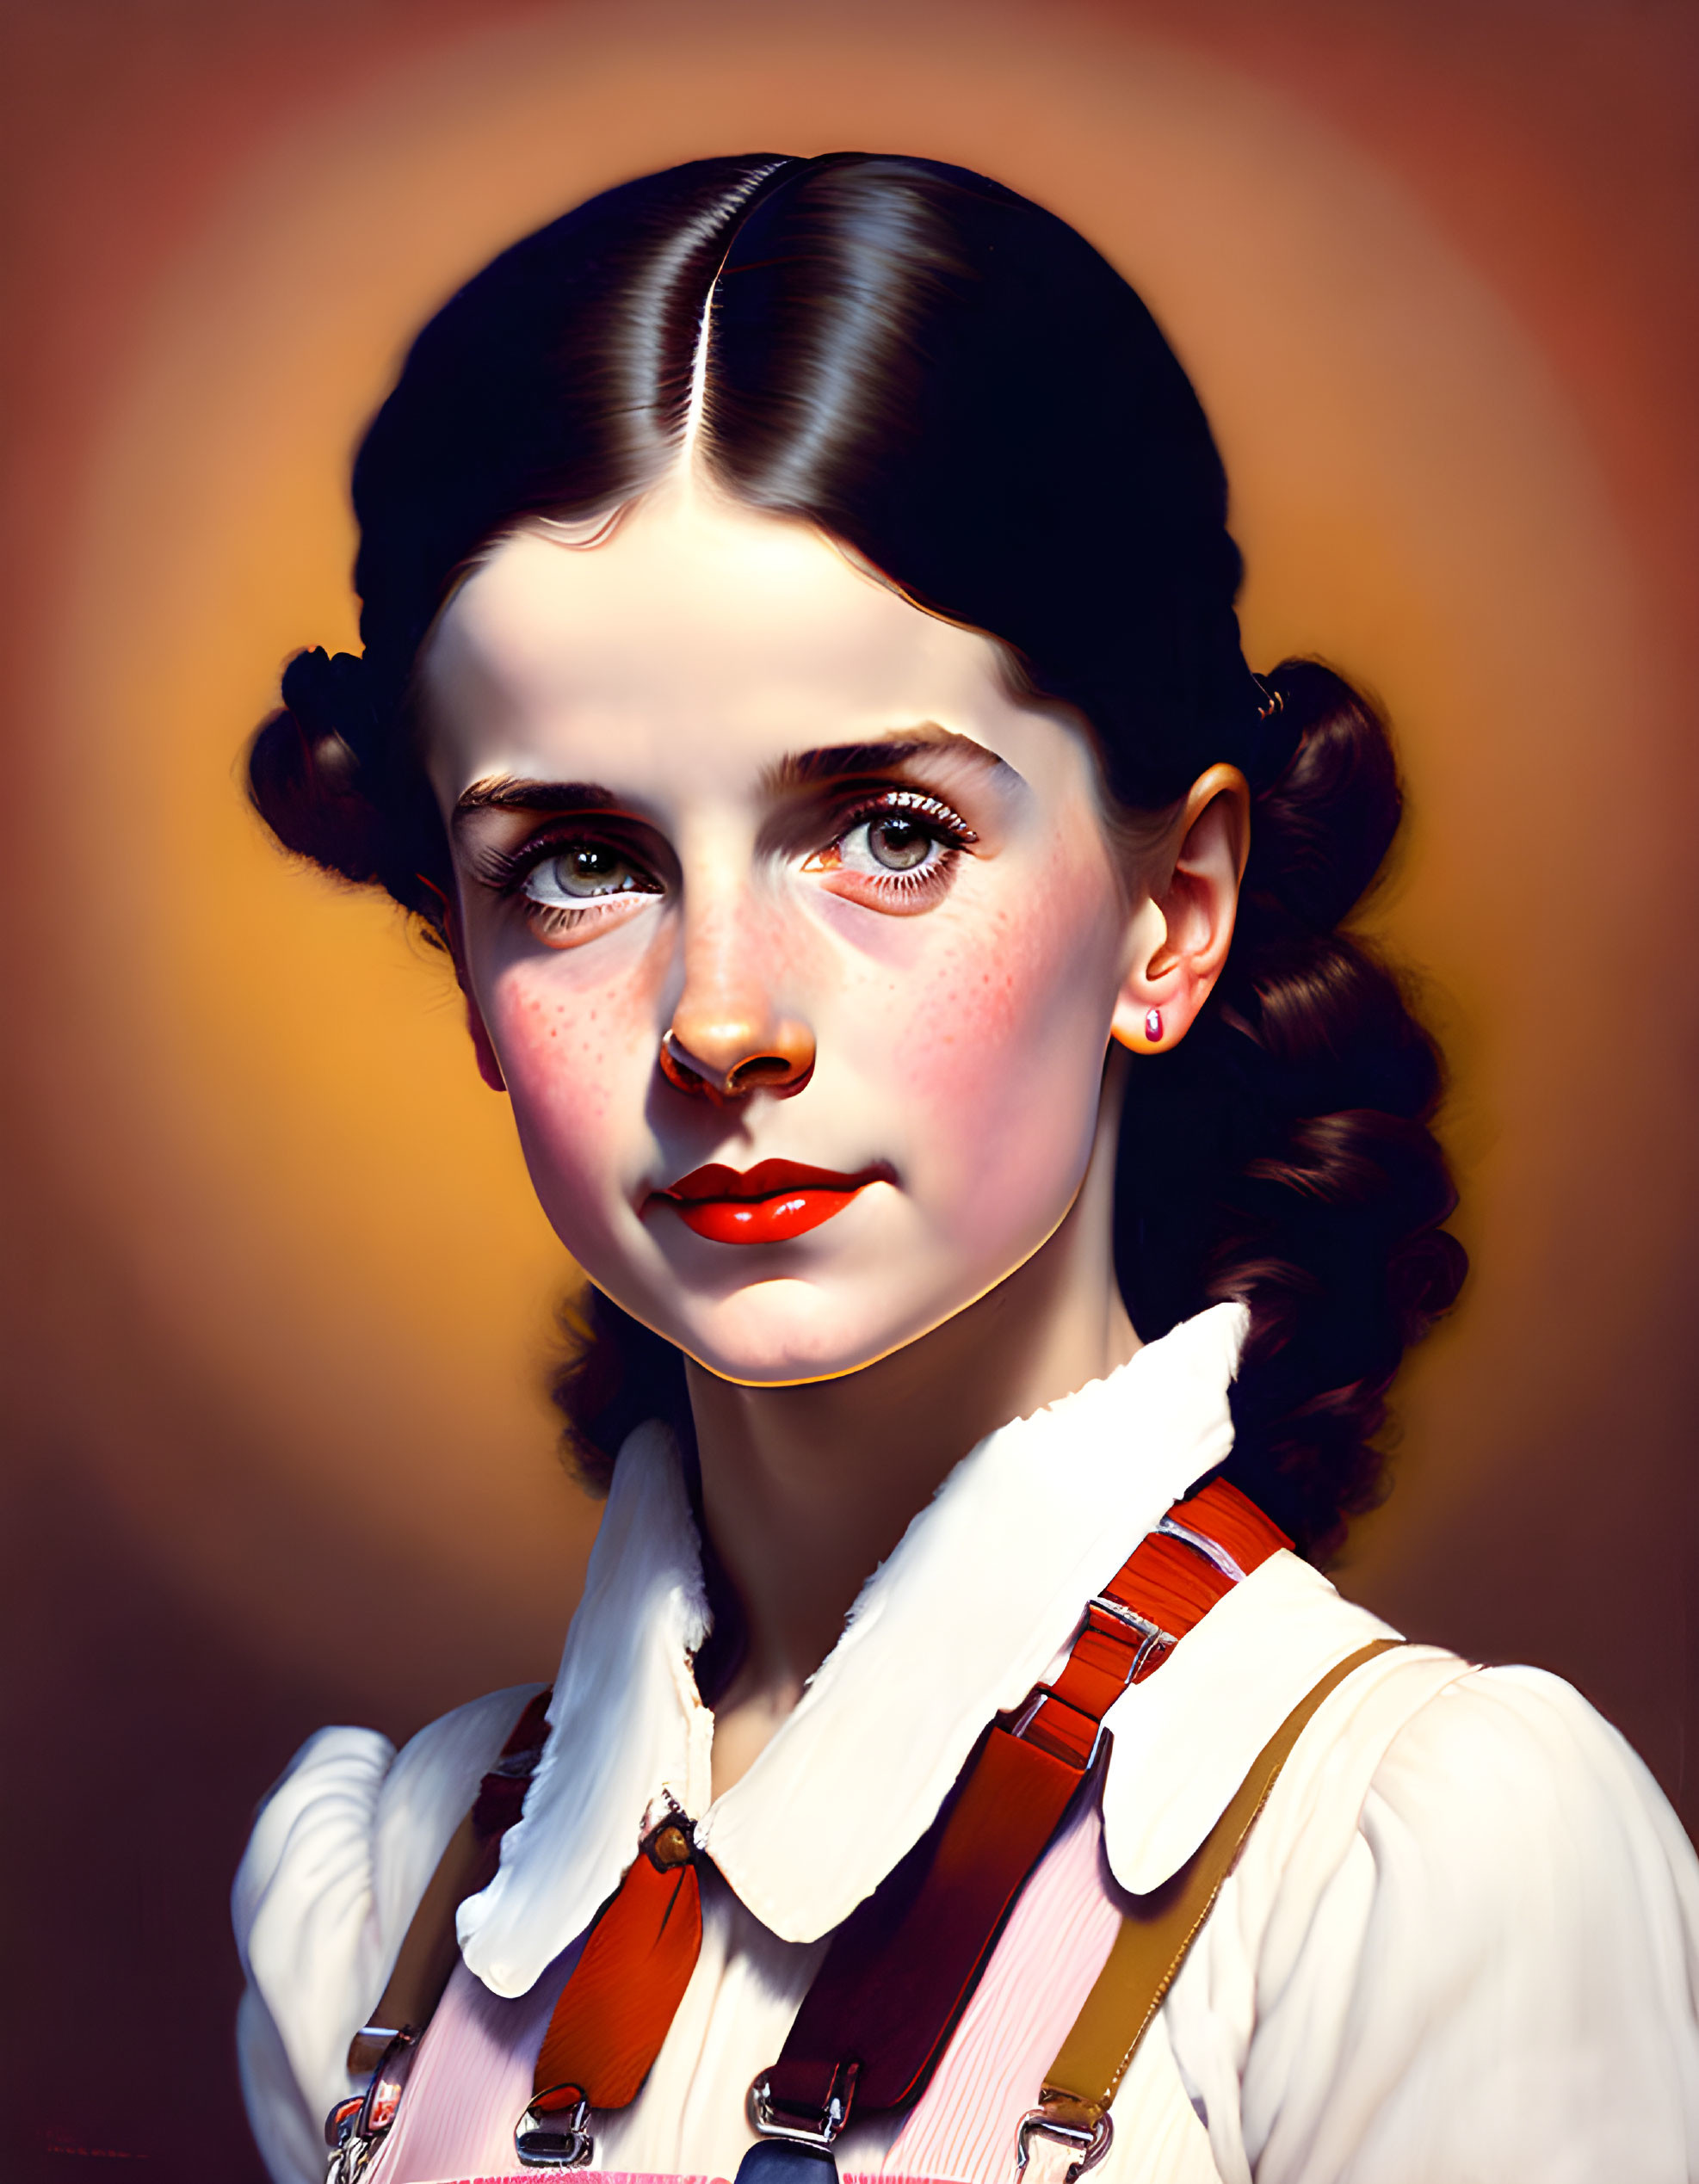 Girl with Braided Hair in Suspenders and White Shirt on Warm Background